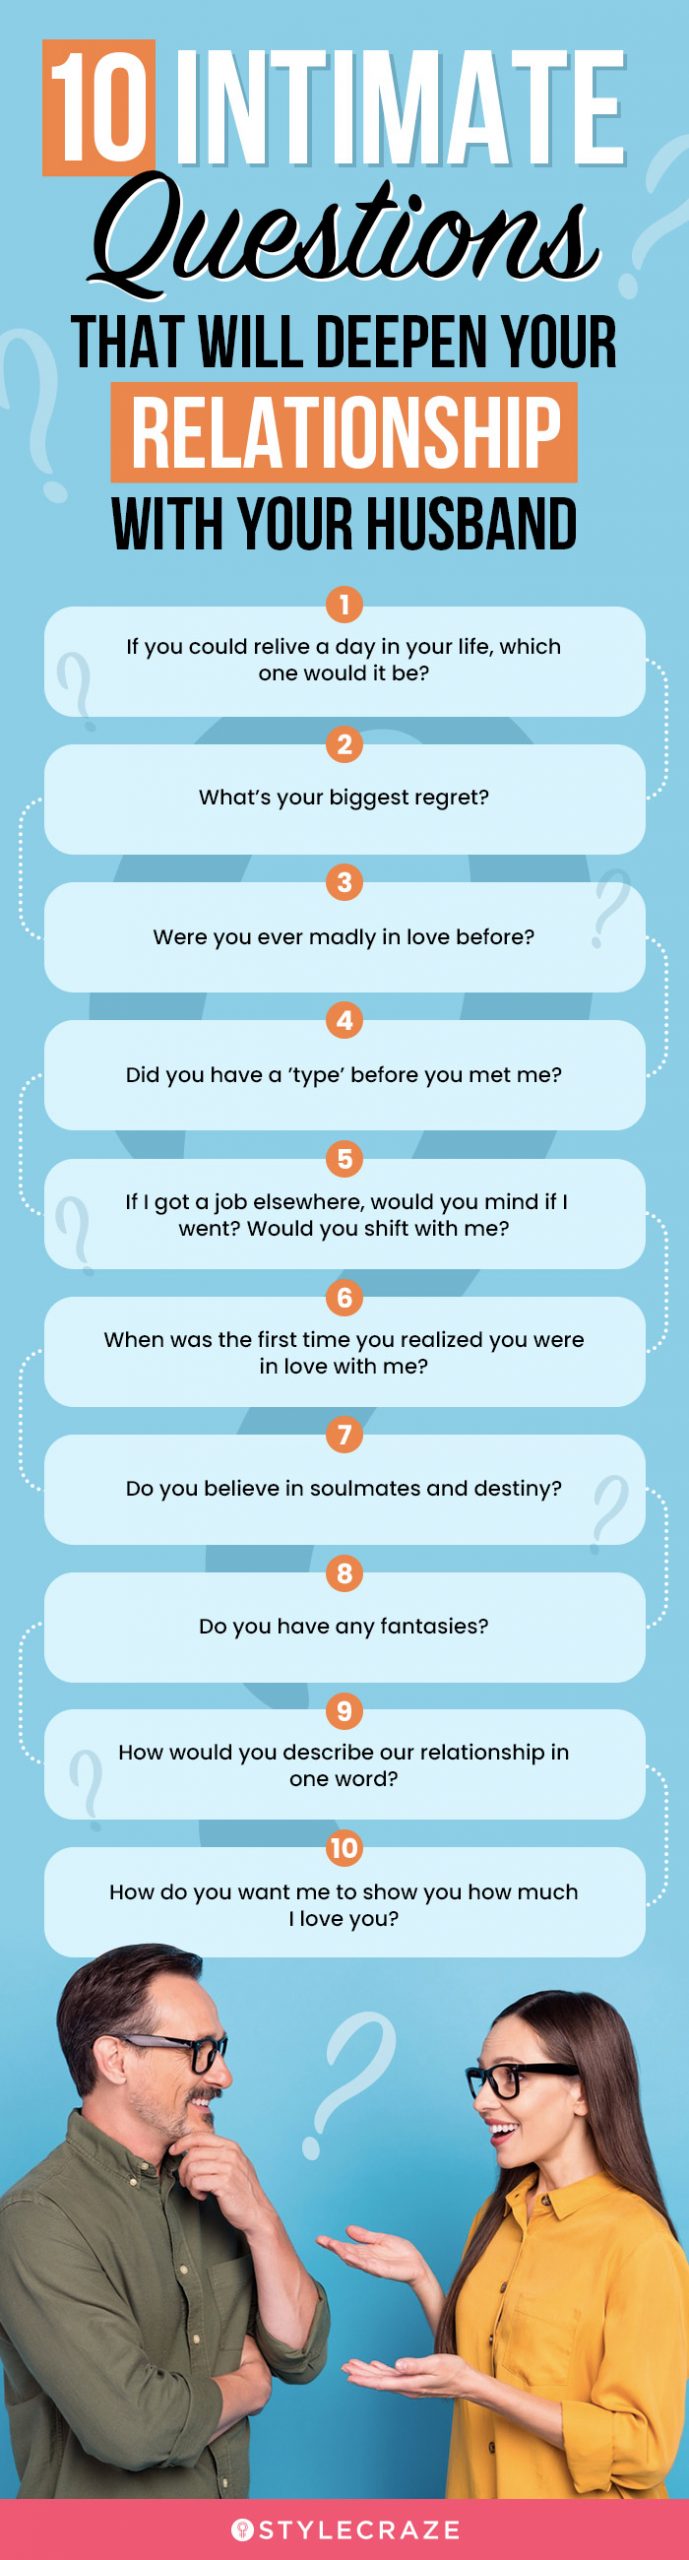 top 10 intimate questions for your husband (infographic)